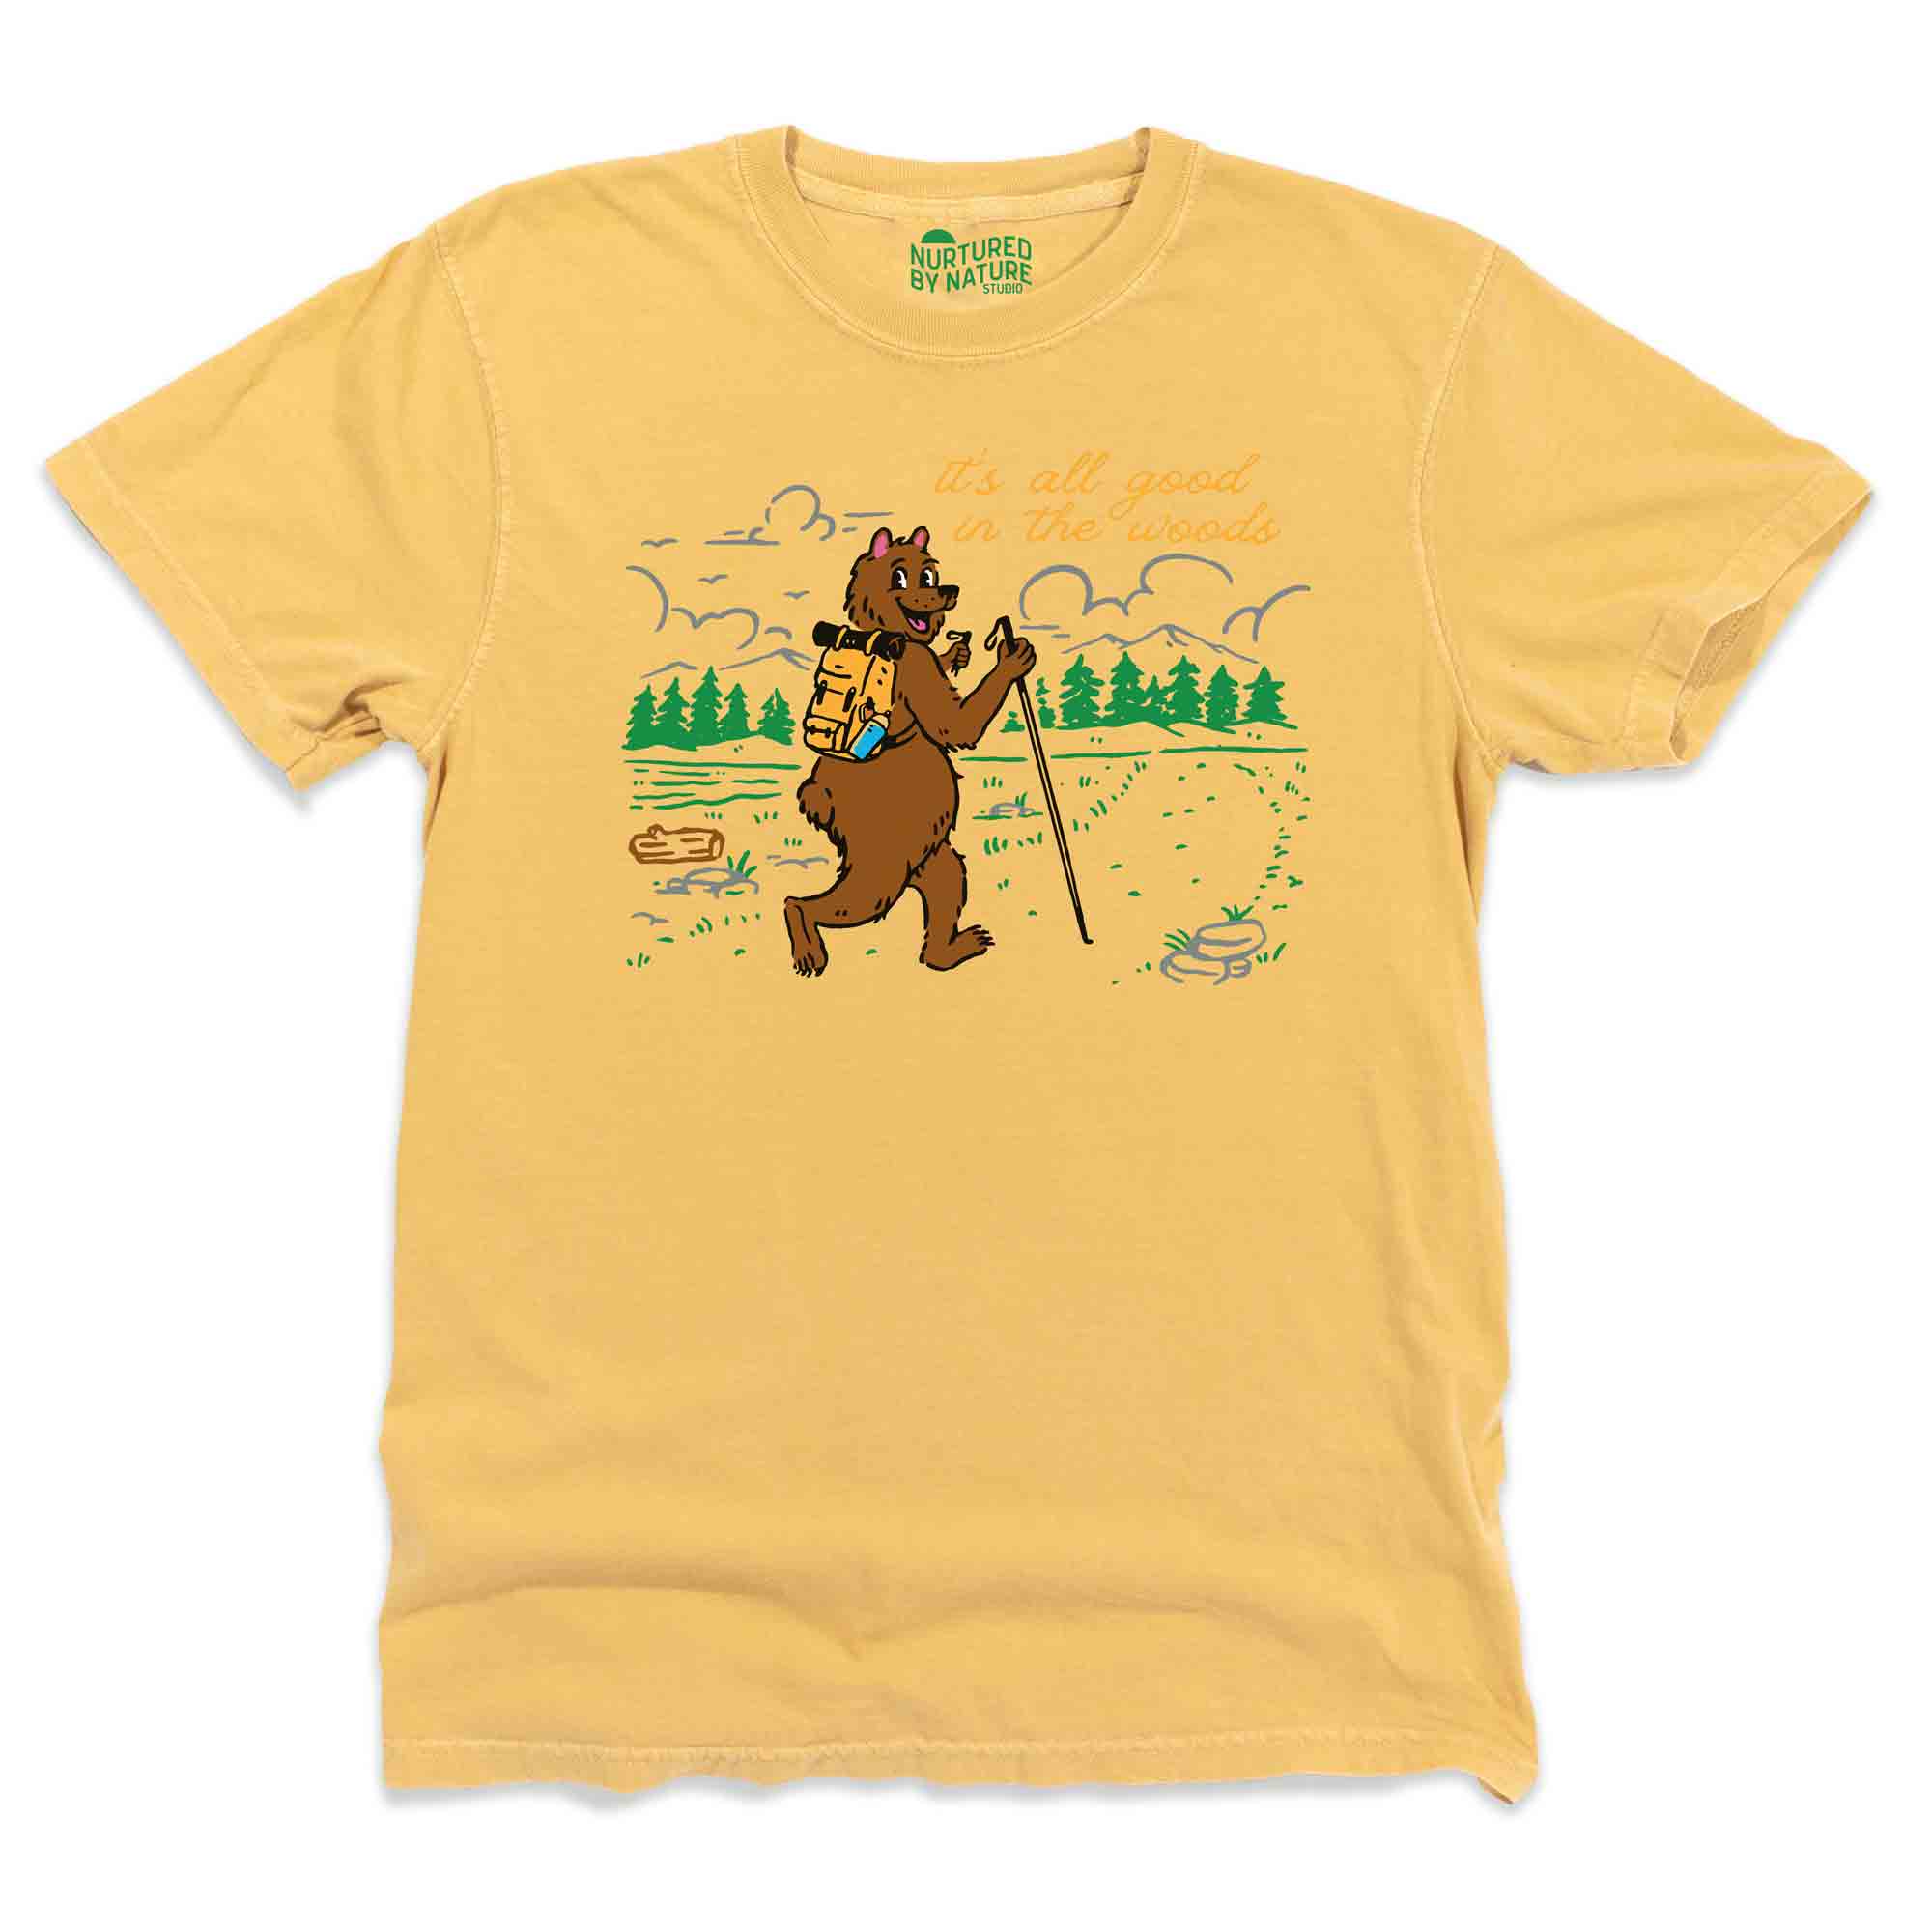 It&#39;s All Good in the Woods Hiking Bear Graphic T-Shirt